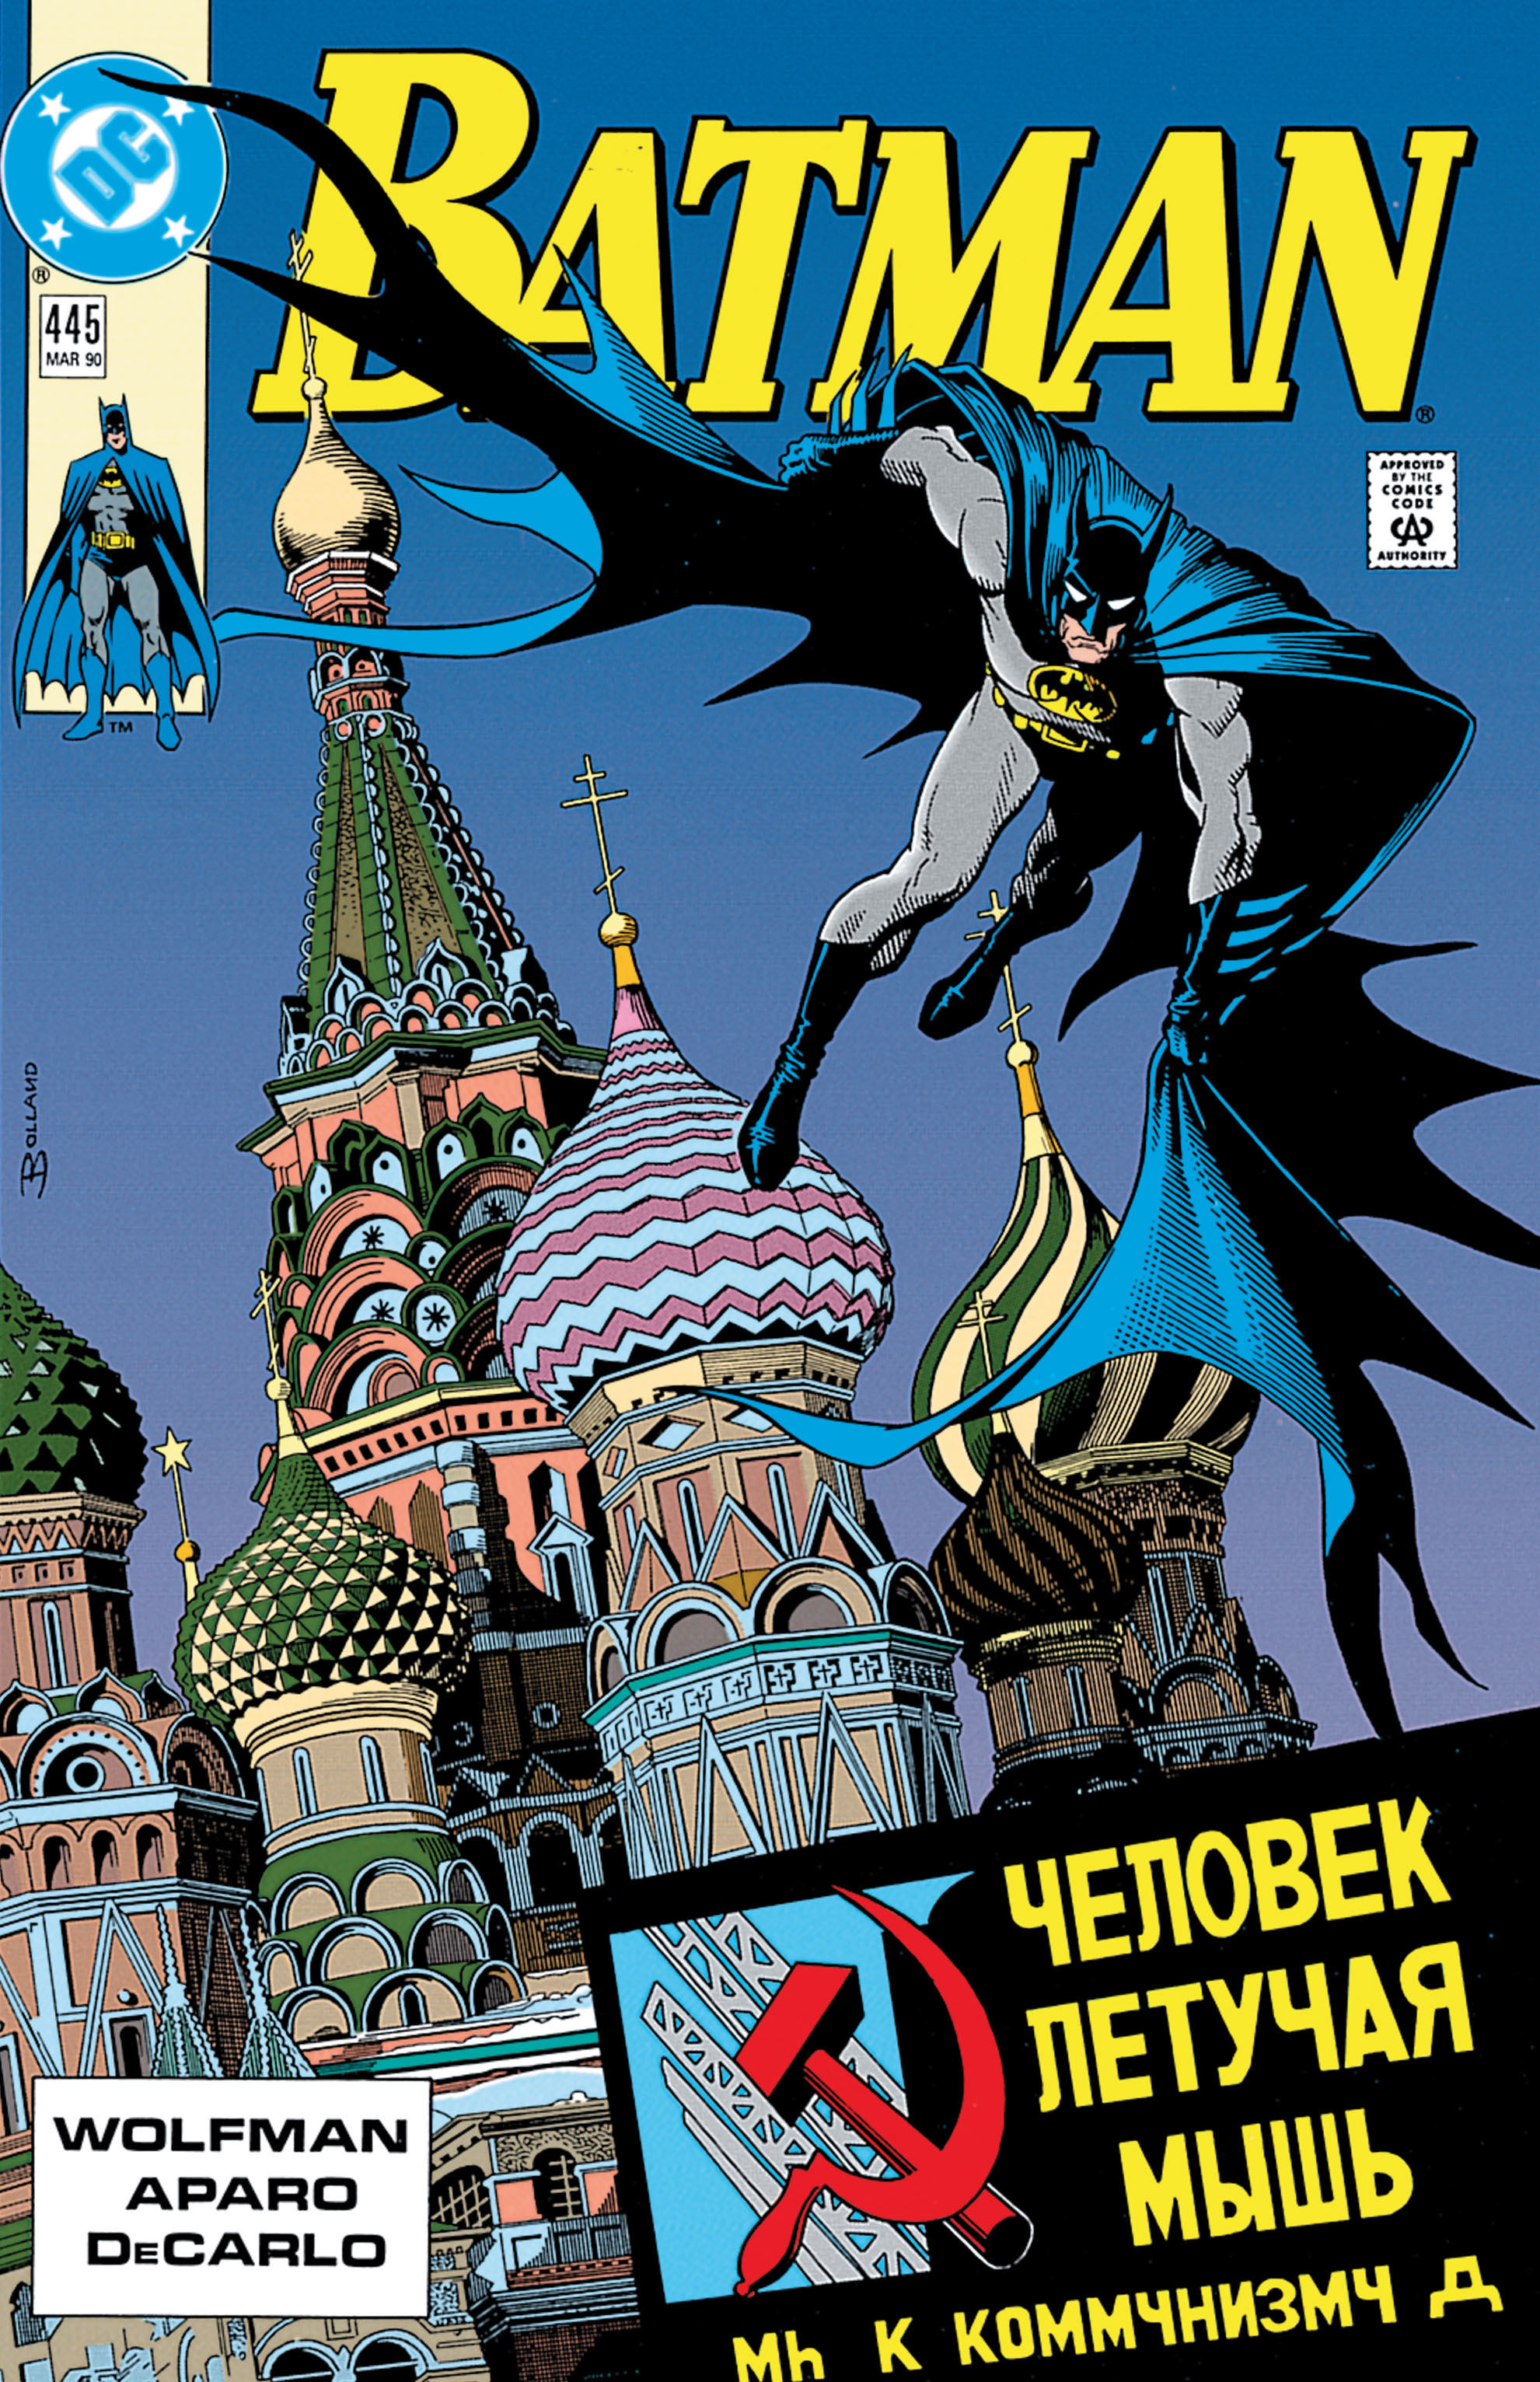 Batman 1940 Issue 445 | Read Batman 1940 Issue 445 comic online in high  quality. Read Full Comic online for free - Read comics online in high  quality .| READ COMIC ONLINE